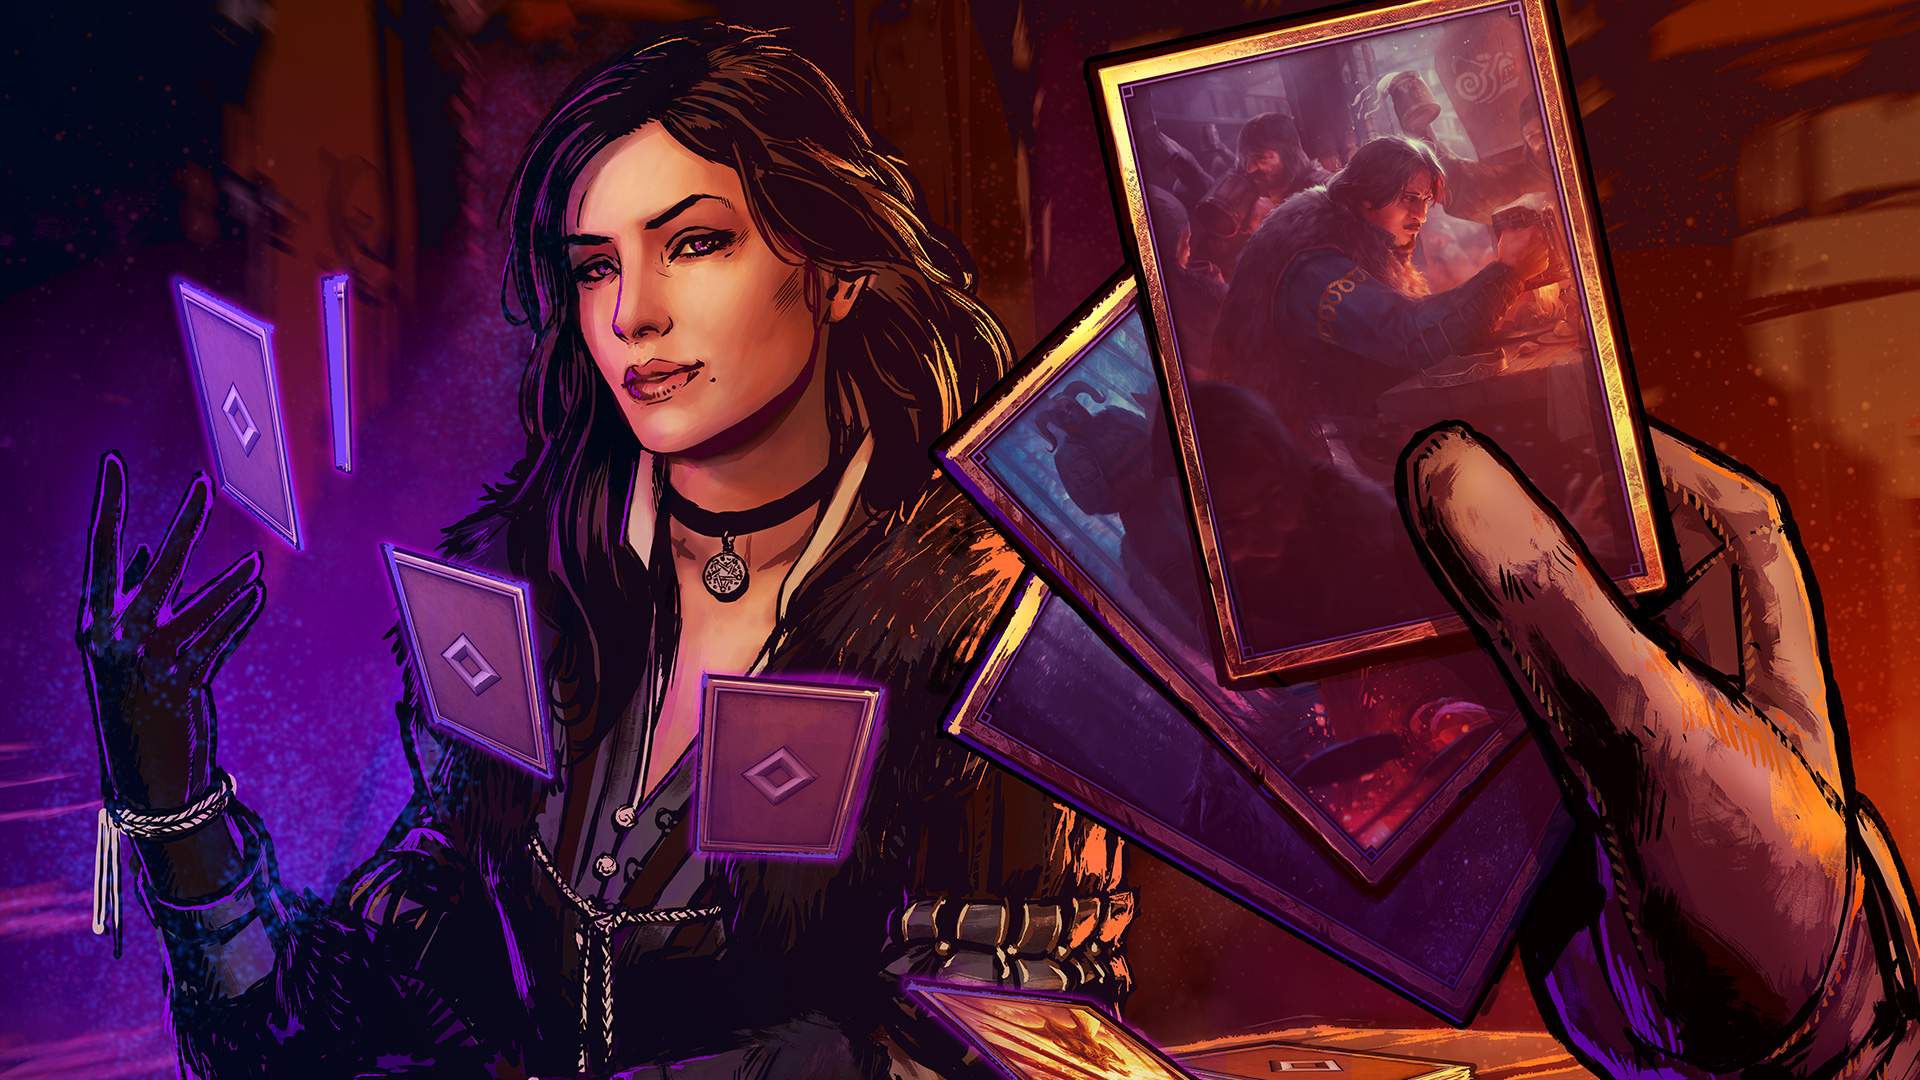 Gwent The Witcher Card Game Yennefer Of Vengerberg 1920x1080